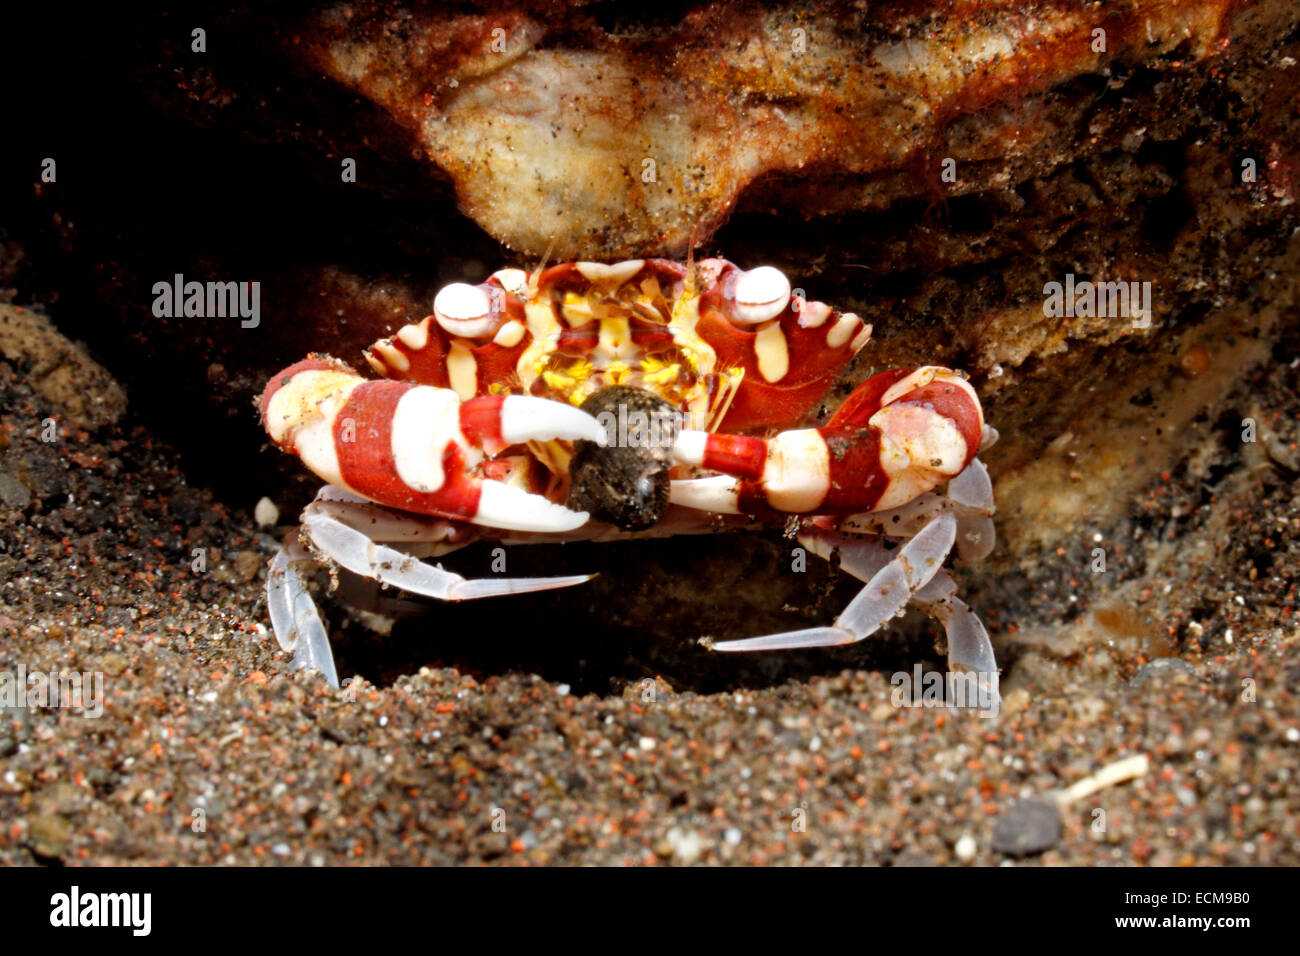 Red and White Harlequin Crab, Lissocarcinus laevis, in front of tube anemone. This crab has a small mollusk held in its claws. Stock Photo